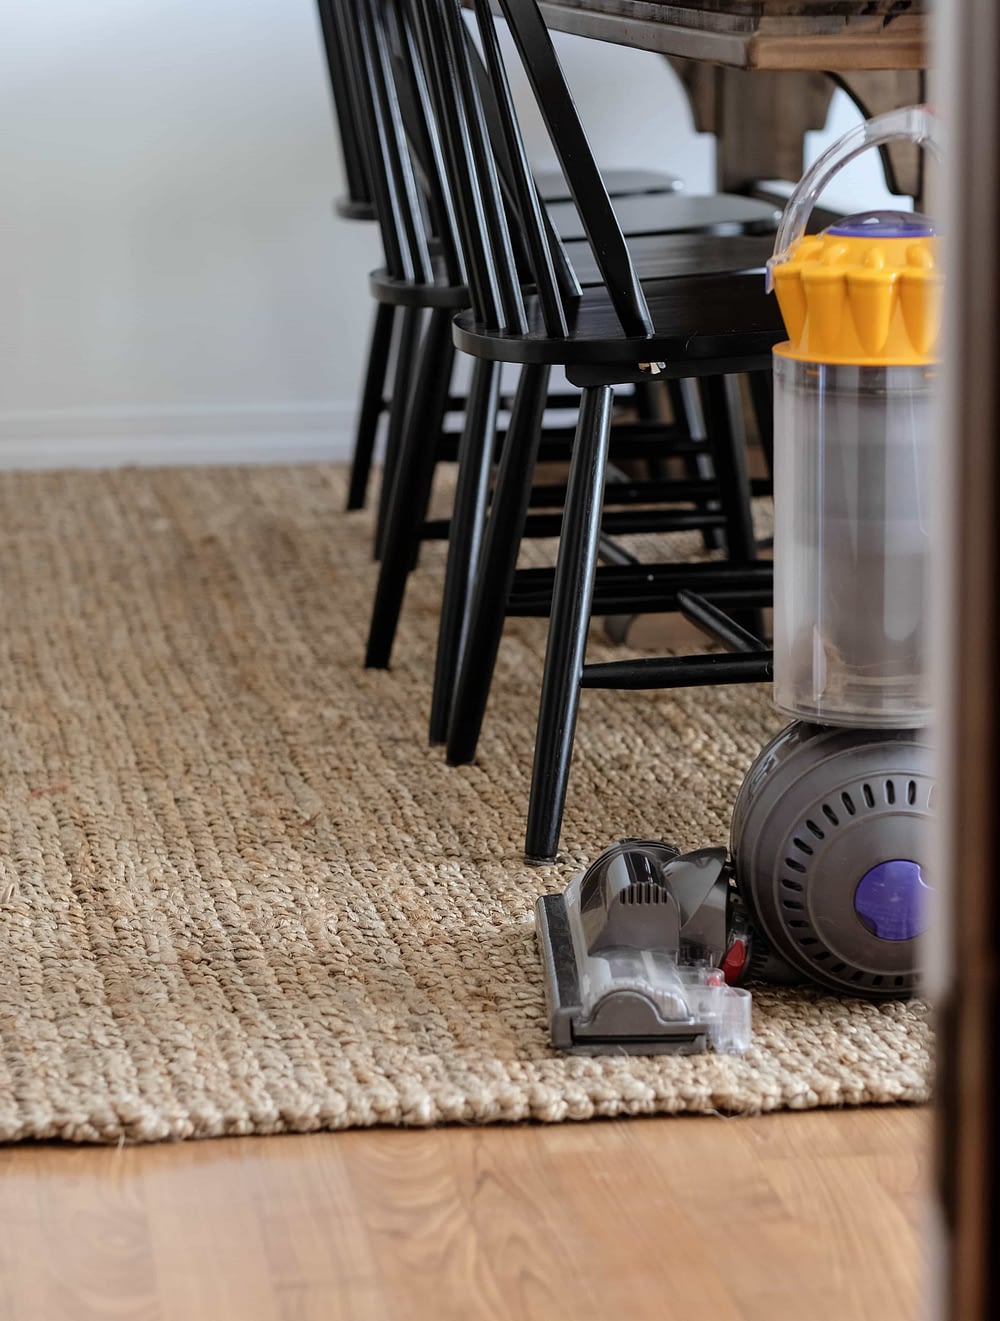 Jute rug in dining room with table and chairs. Dyson vacuum in foreground.